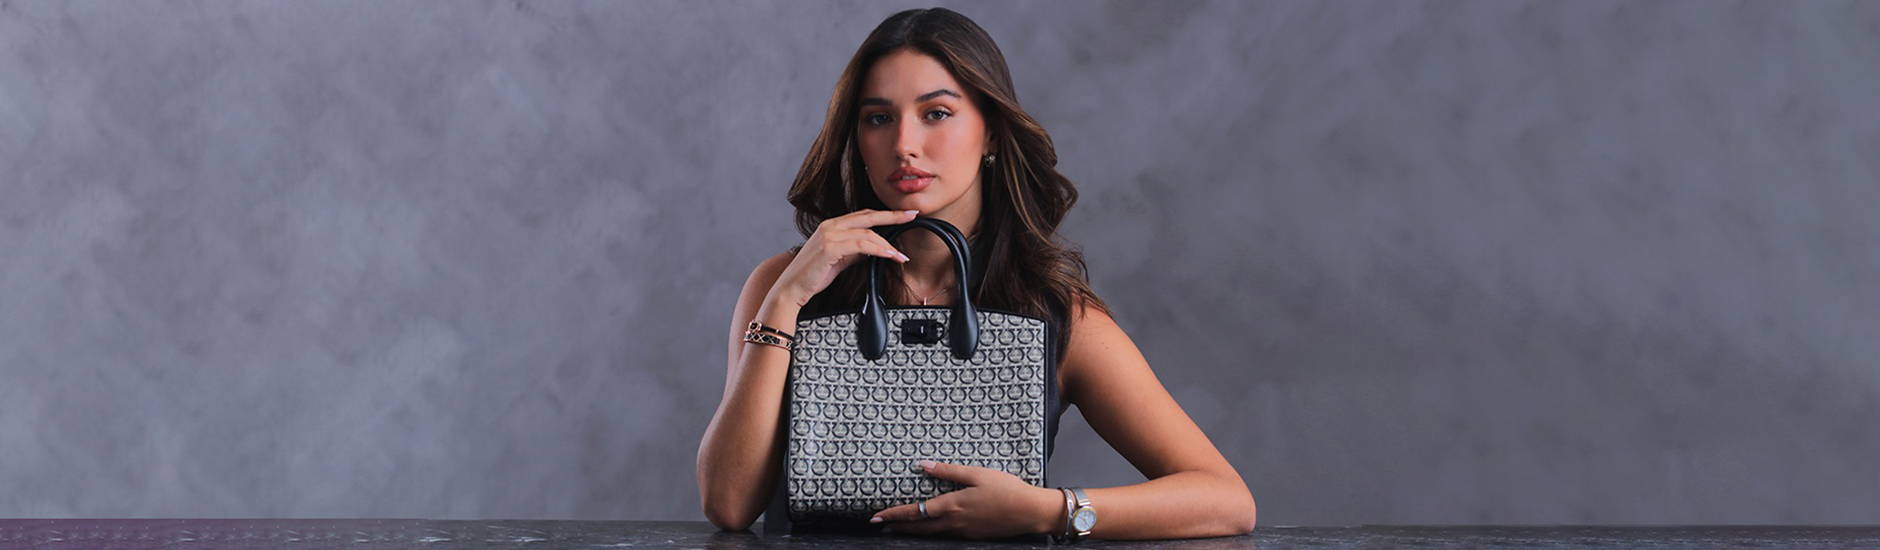 Celebrate The Finer Things with an 11.11 Luxury Haul